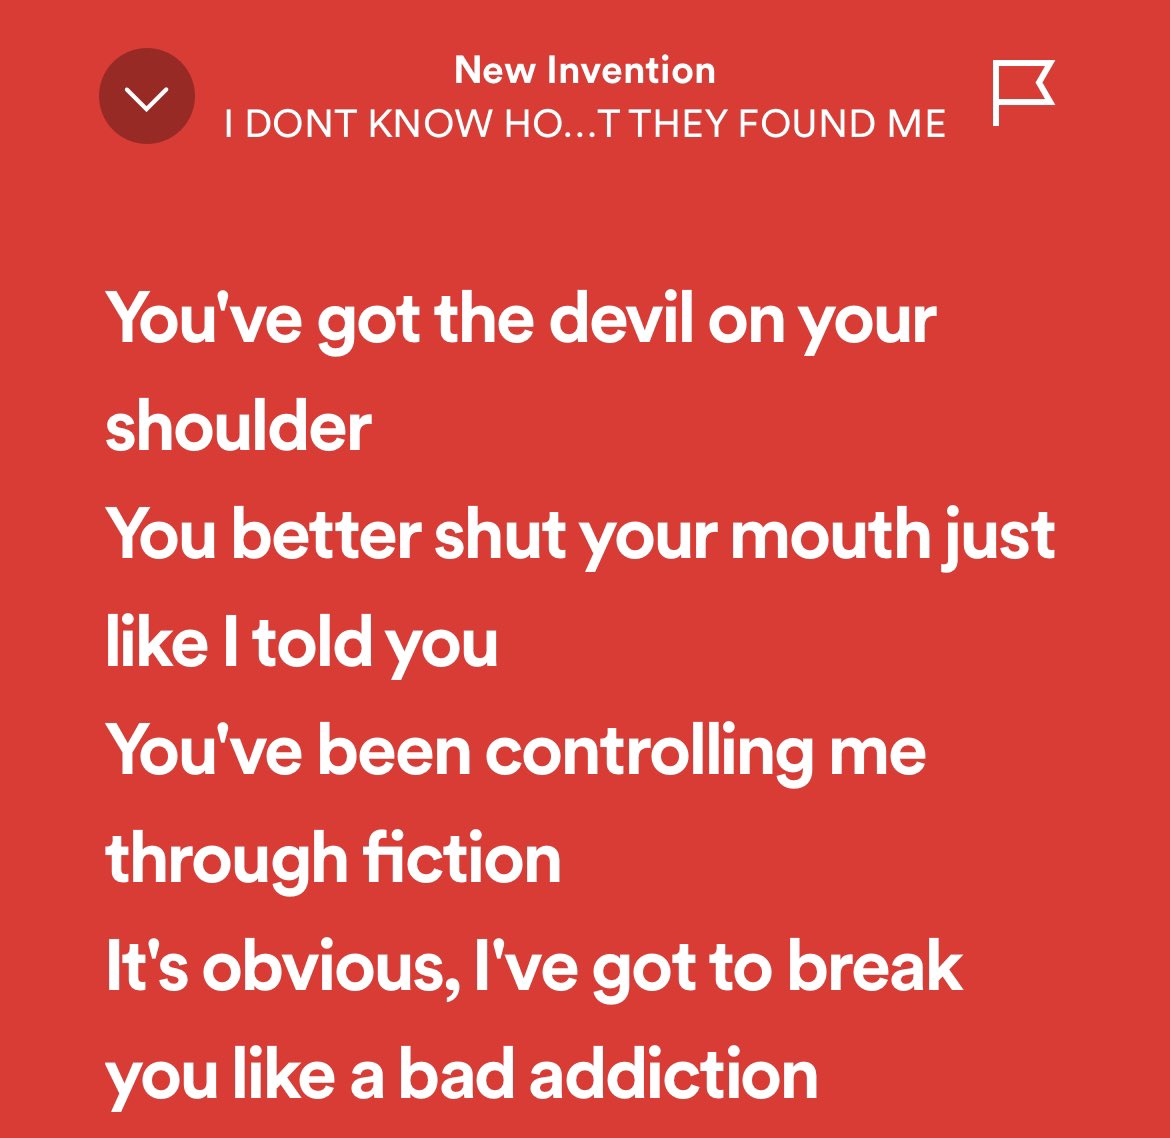 i don’t know how but they found me wrote this song about vanessa fnaf